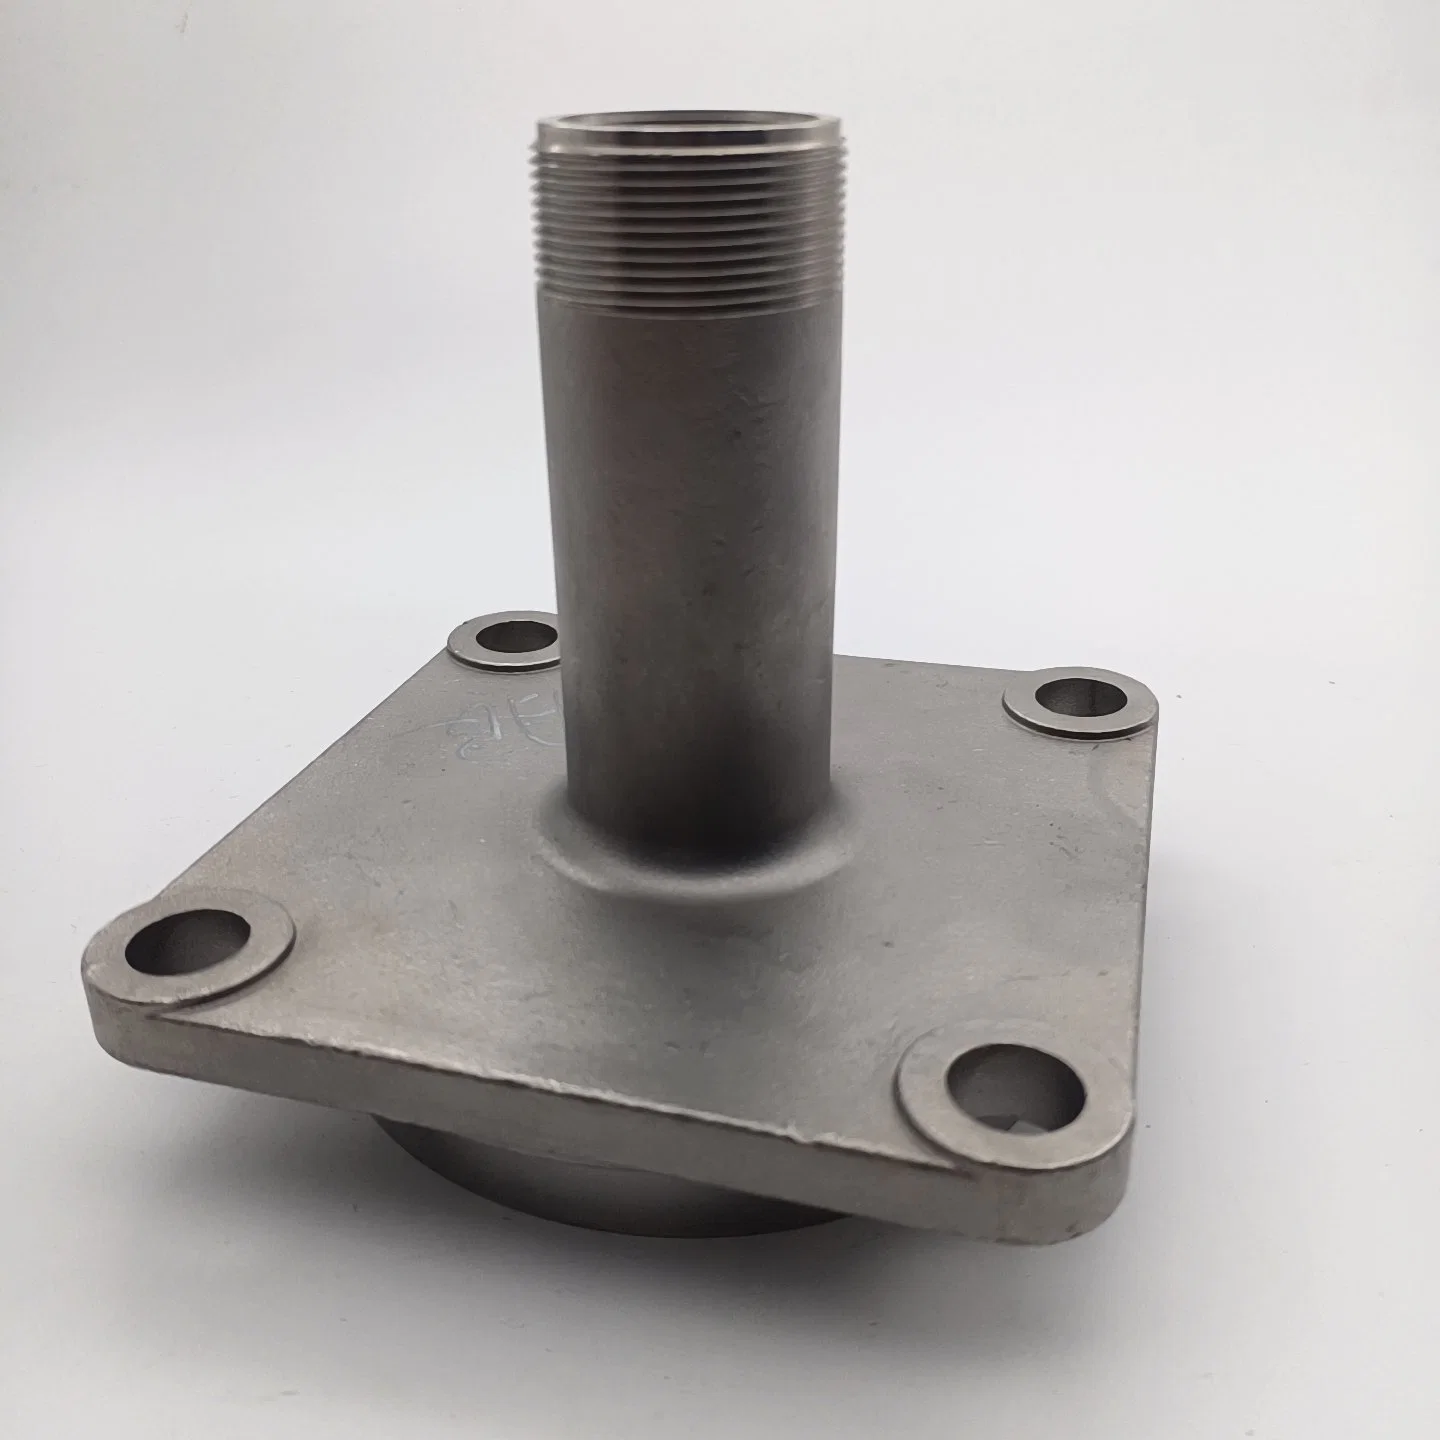 Precision Casting Investment Casting Deck Marine Hardware by Lost Wax Casting